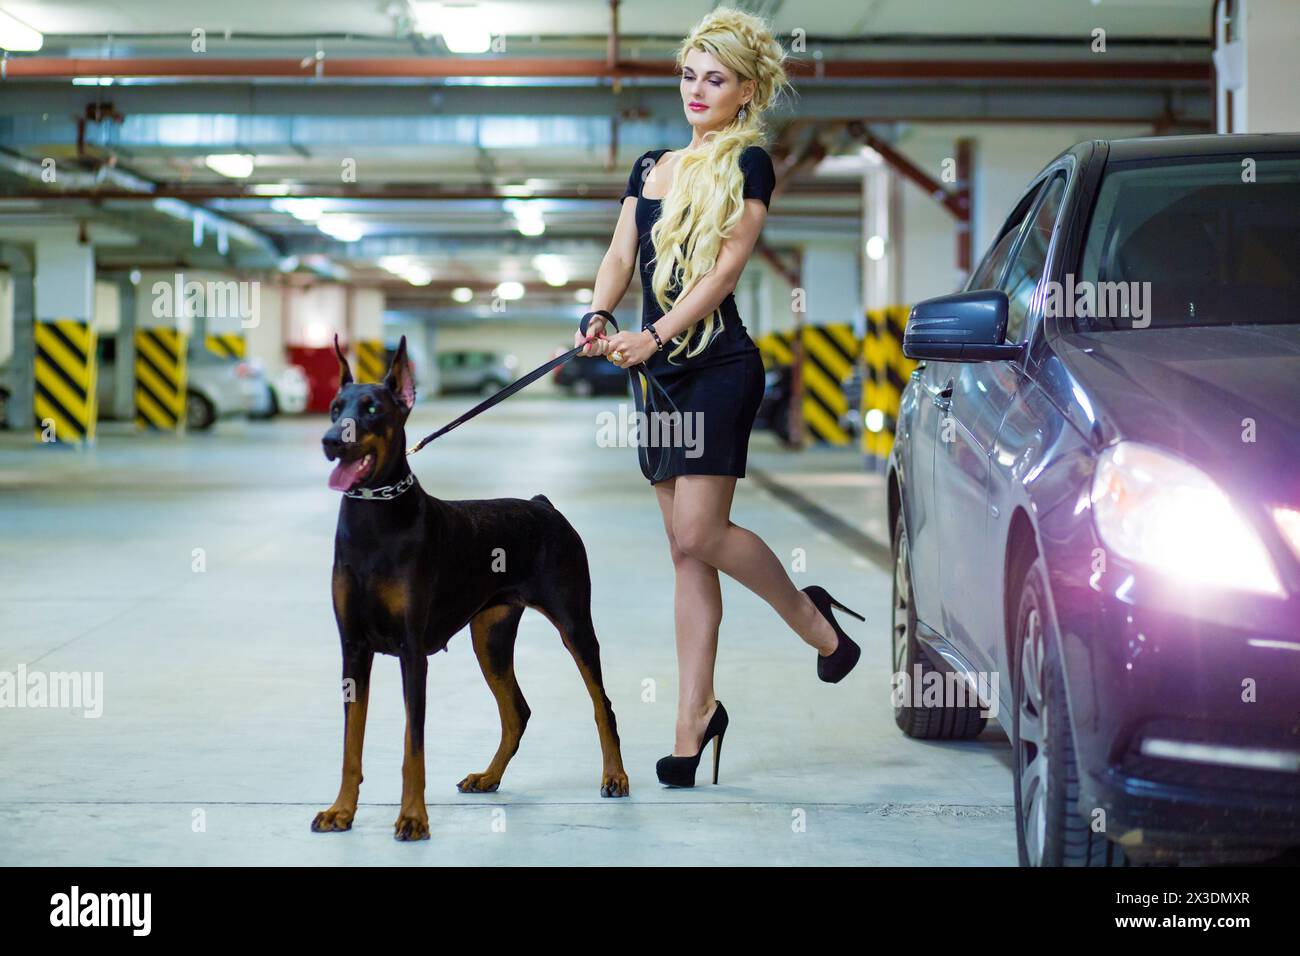 MOSCOW - JUN 01, 2015: Girl (with model release) with long blond hair in dress with the Doberman on leash in the underground parking Stock Photo